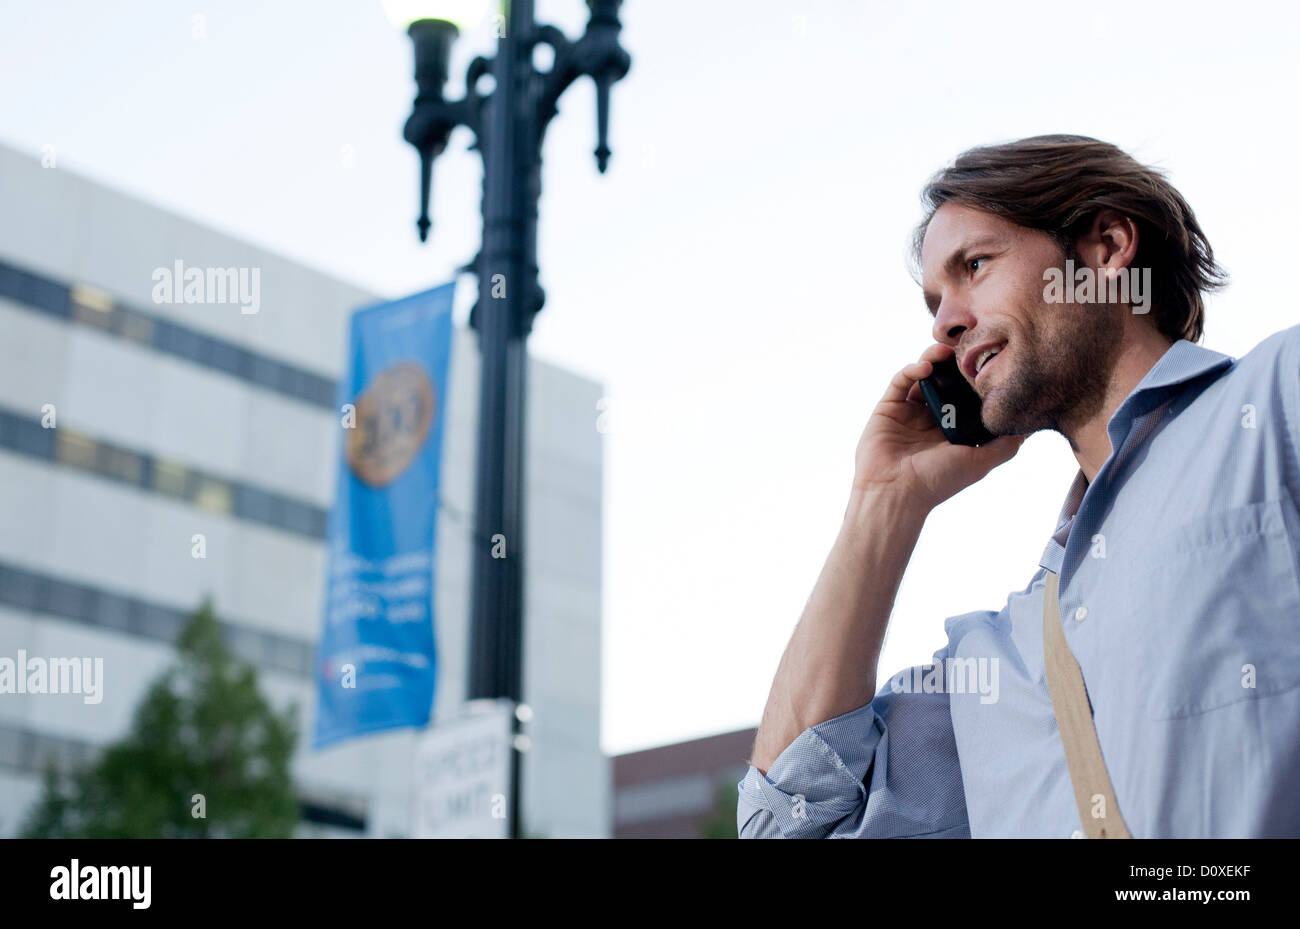 Man on his way to work, using cellphone Stock Photo